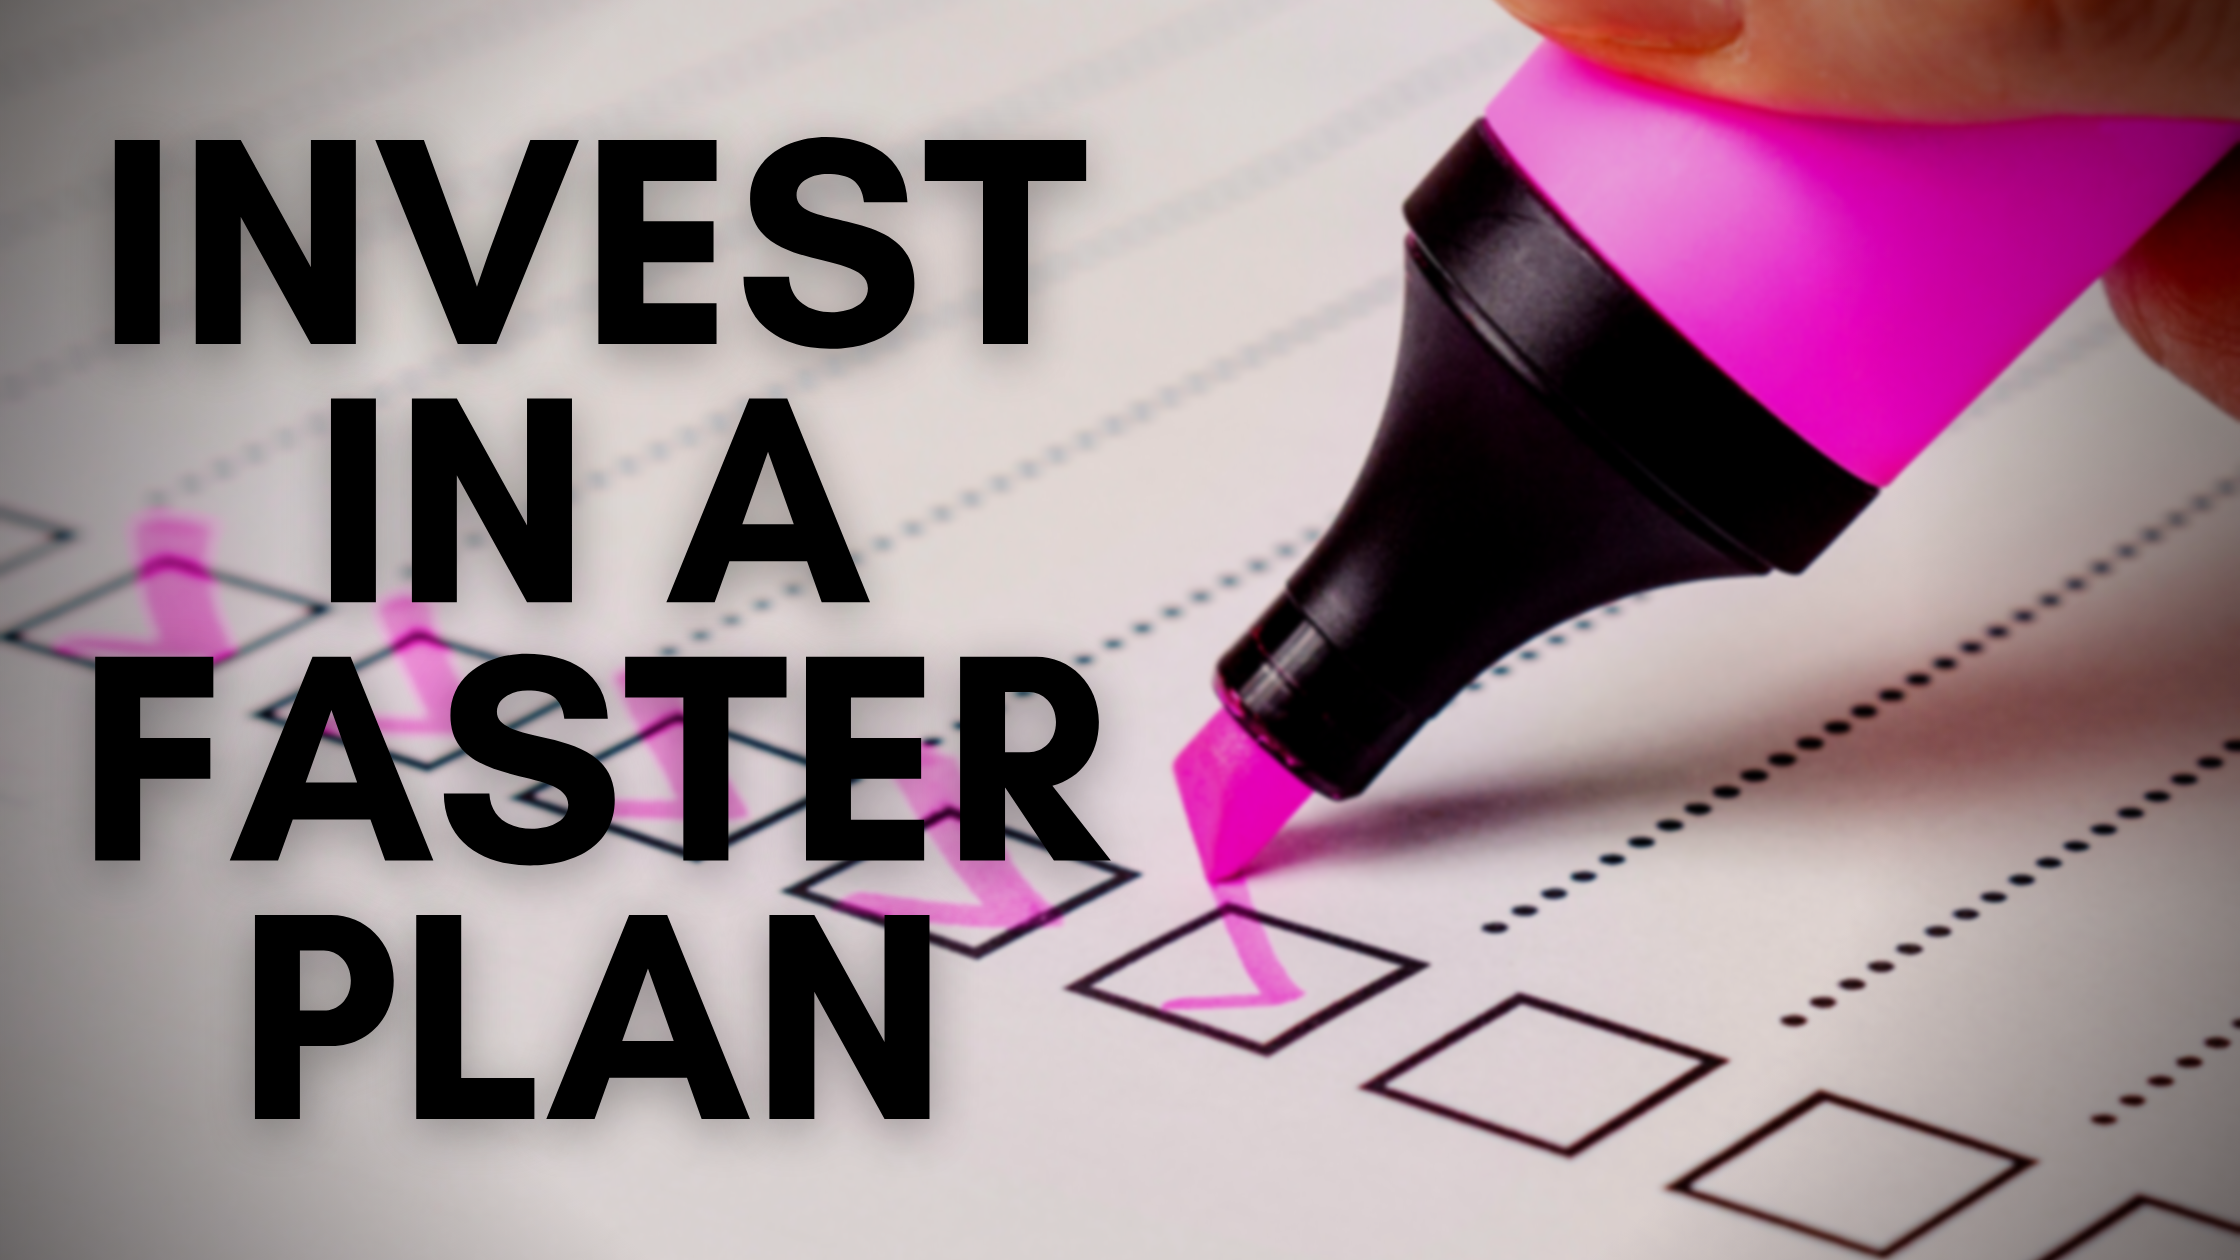 Invest in a faster plan.